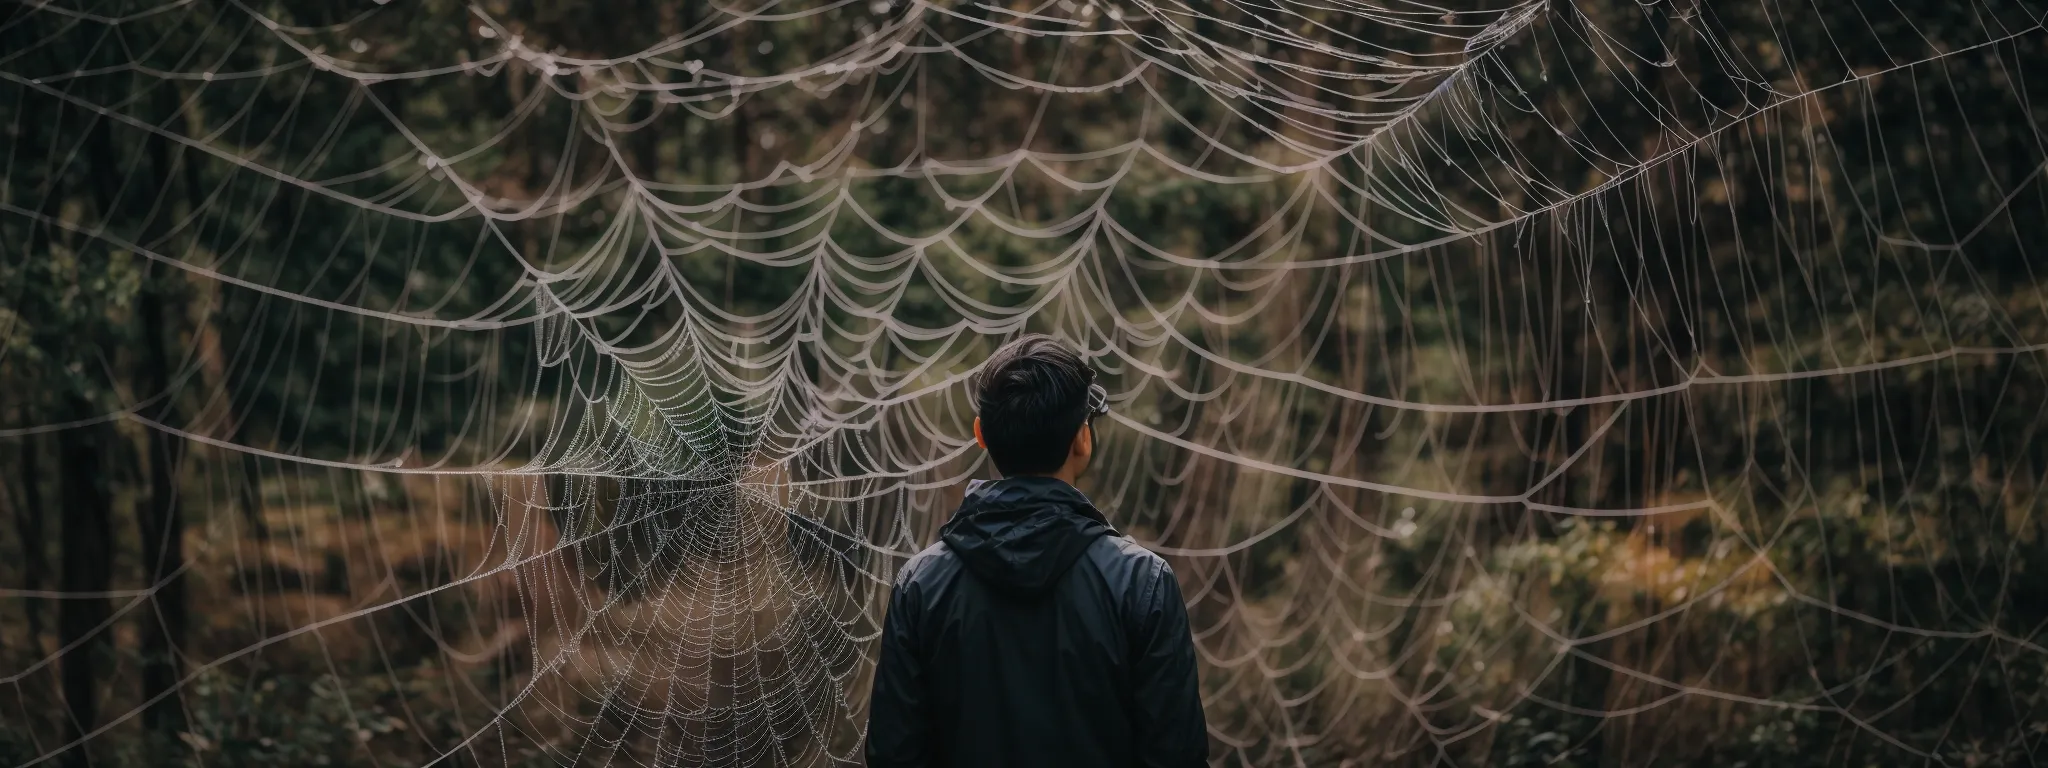 a person peers intently at an intricate web structure, symbolizing the complexity and continuous nature of on-page seo optimization.